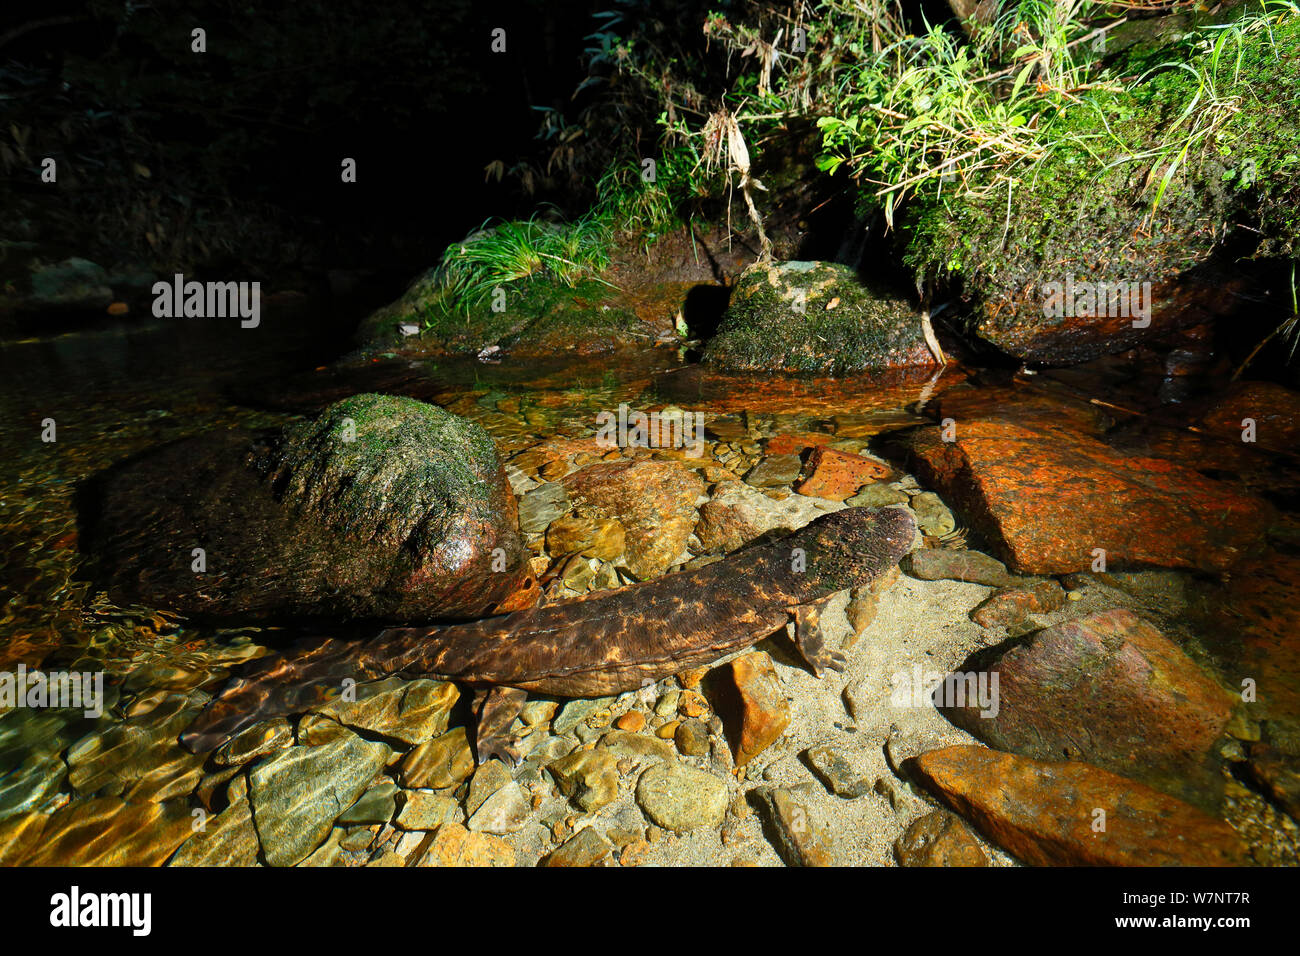 Japanese giant salamander (Andrias japonicus) breathing, Hino River, Tottori, Japan August. Stock Photo